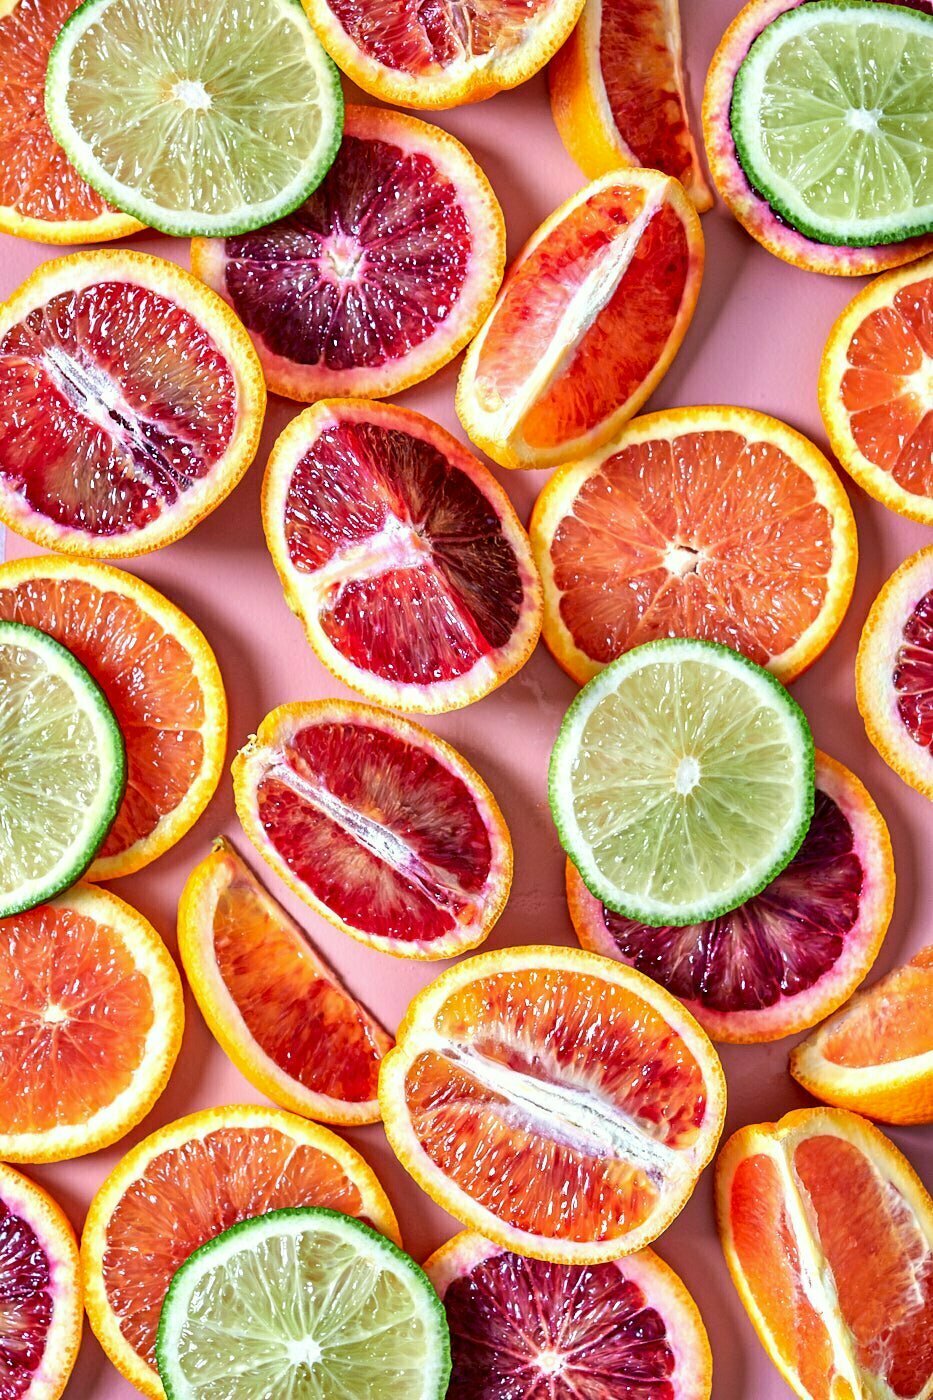 Sliced and quartered oranges, limes, and blood oranges sit on top of a pink background.